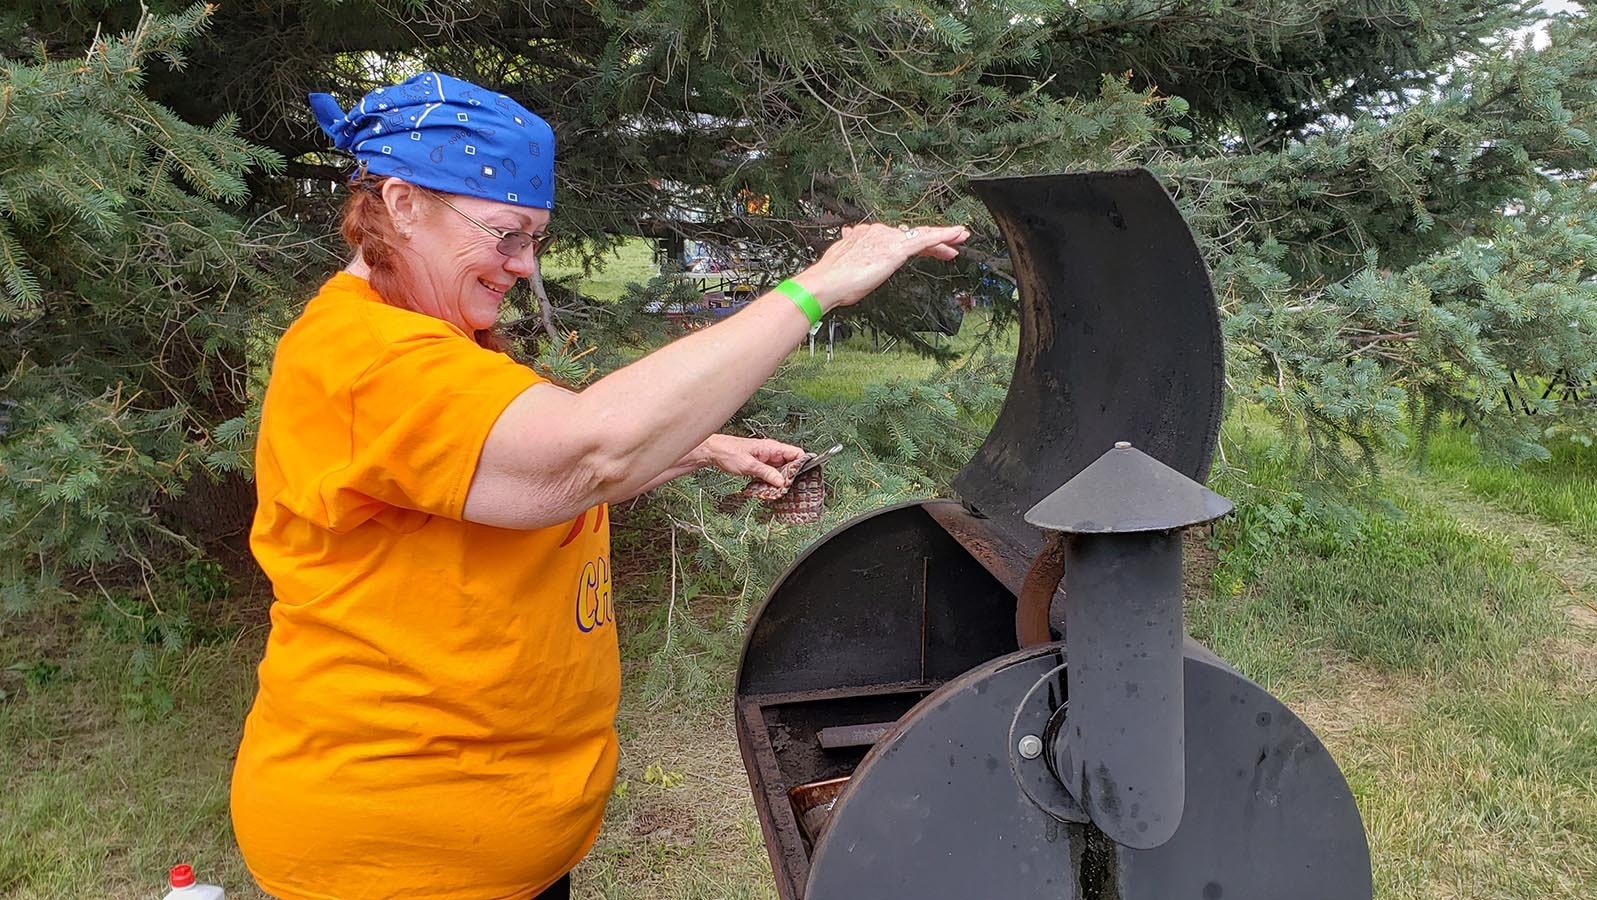 A competitor prepares her smoker for the cookoff.